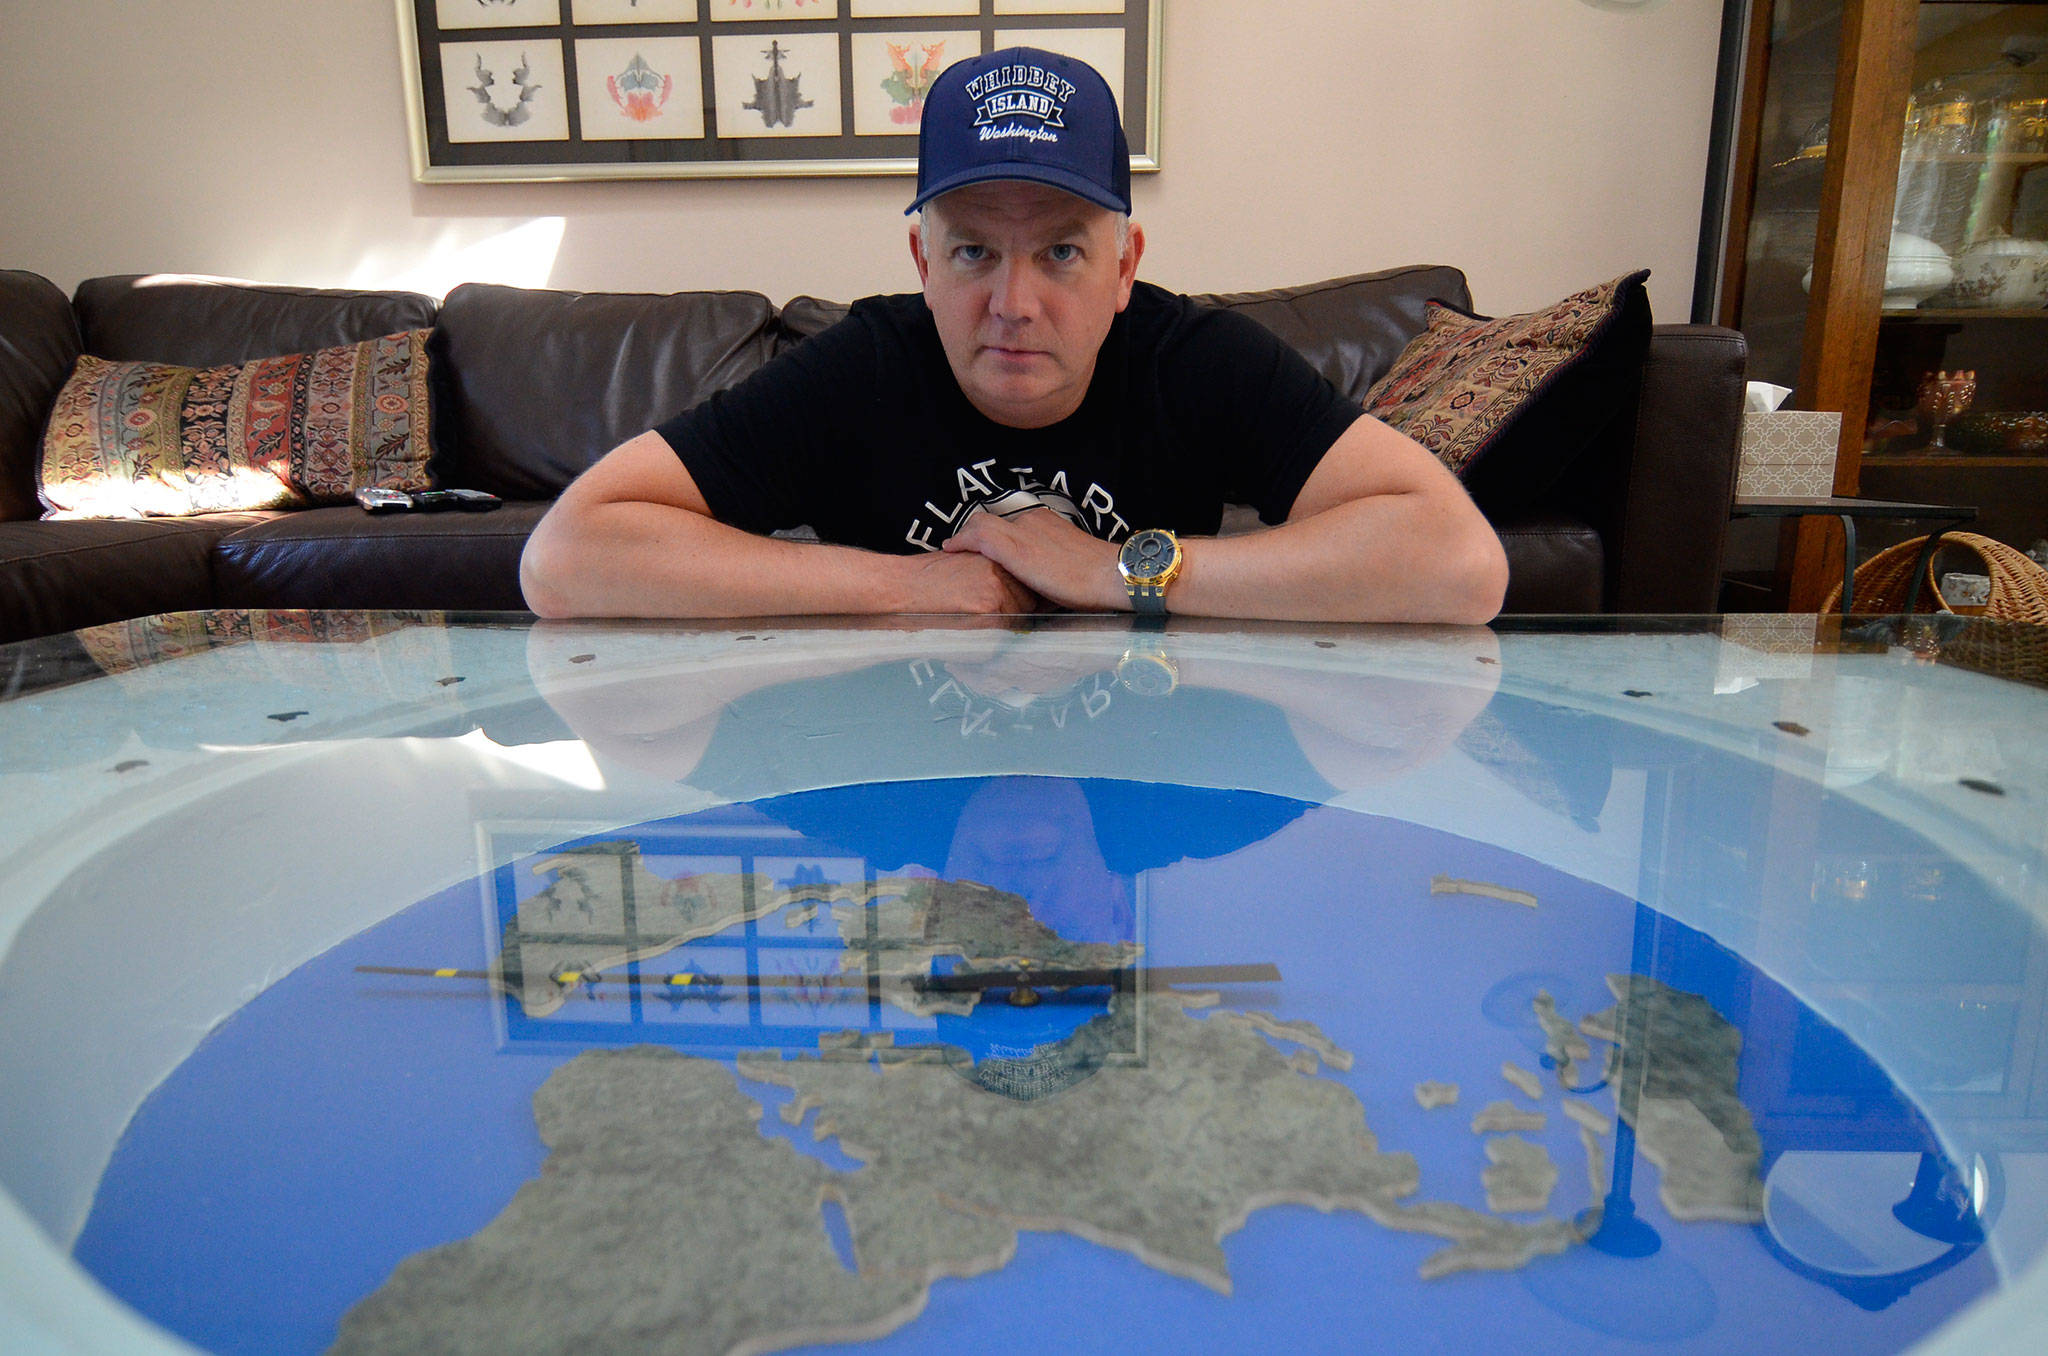 Flat Earth: from skeptic to believer